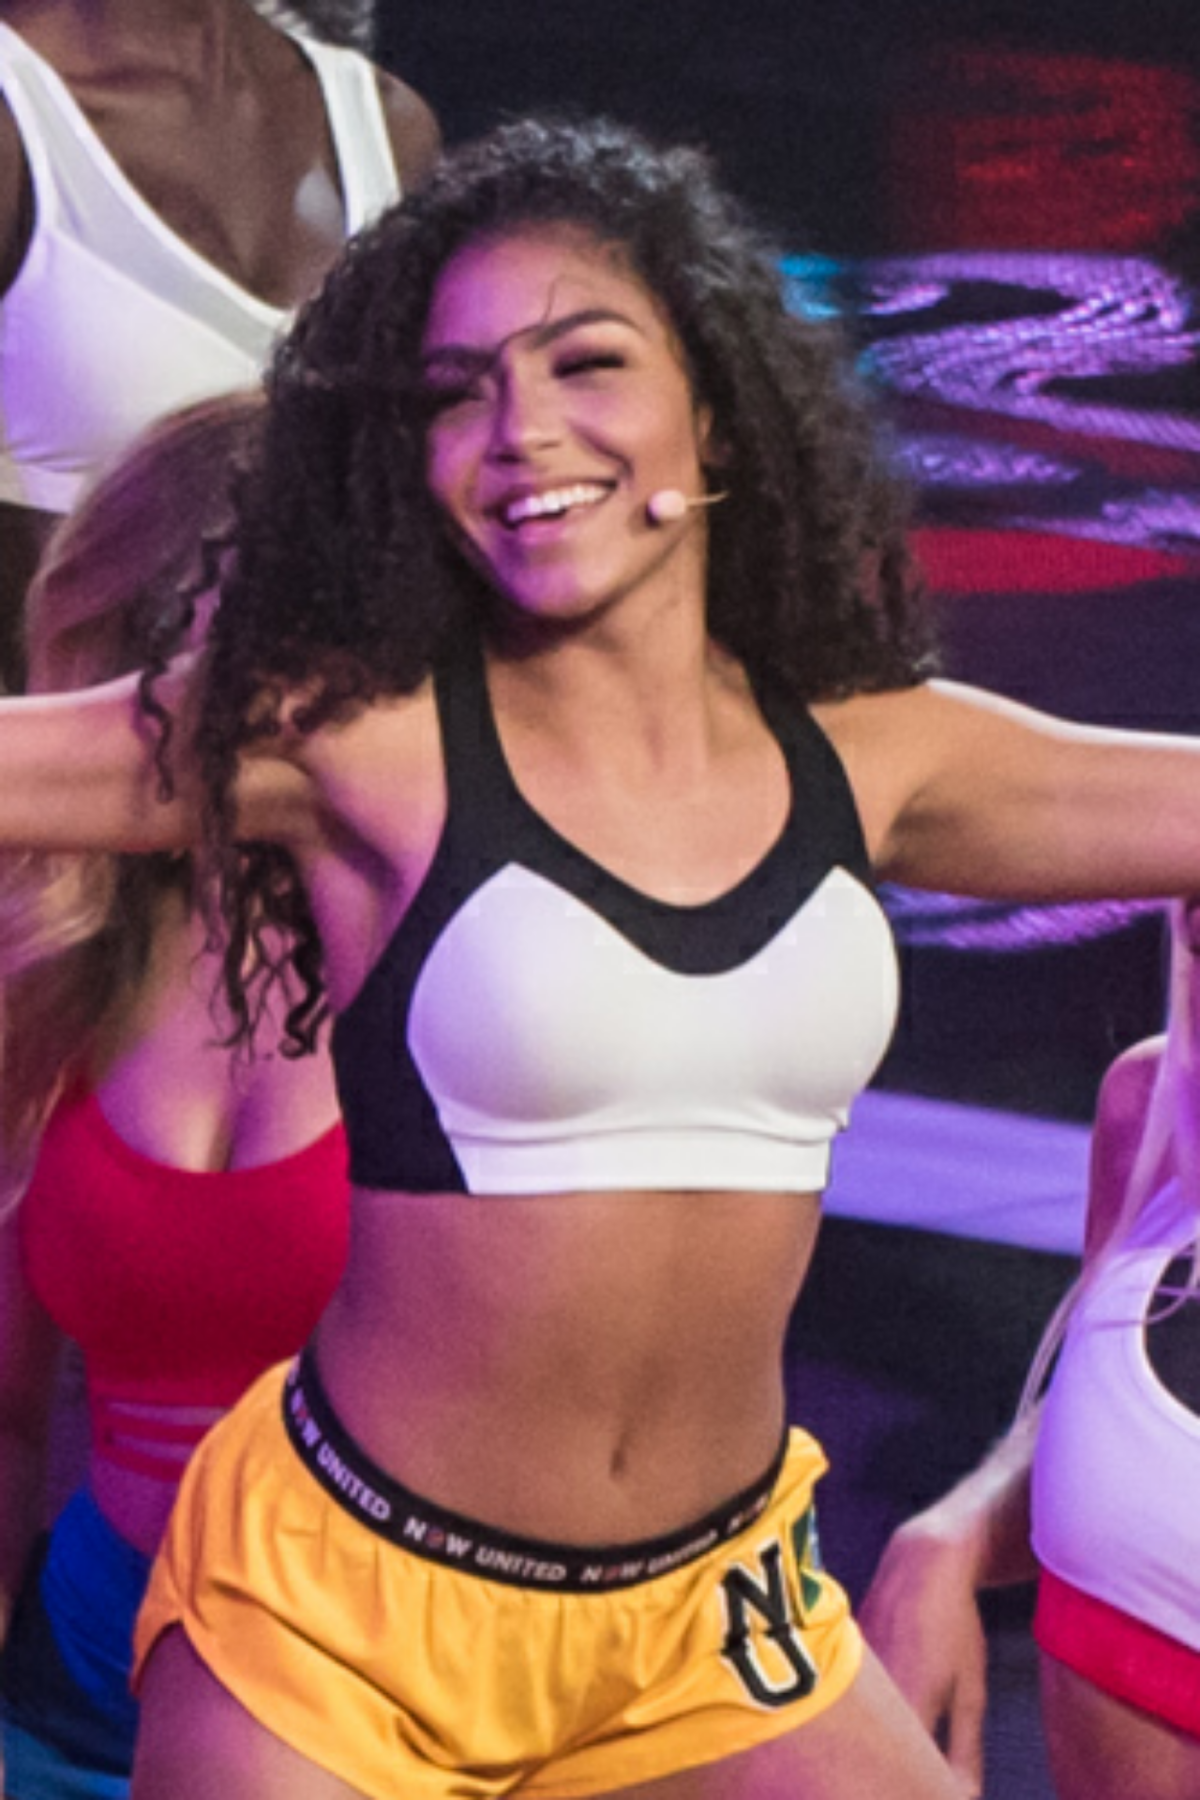 Get Any Gabrielly Foto Do Now United 2020 Images